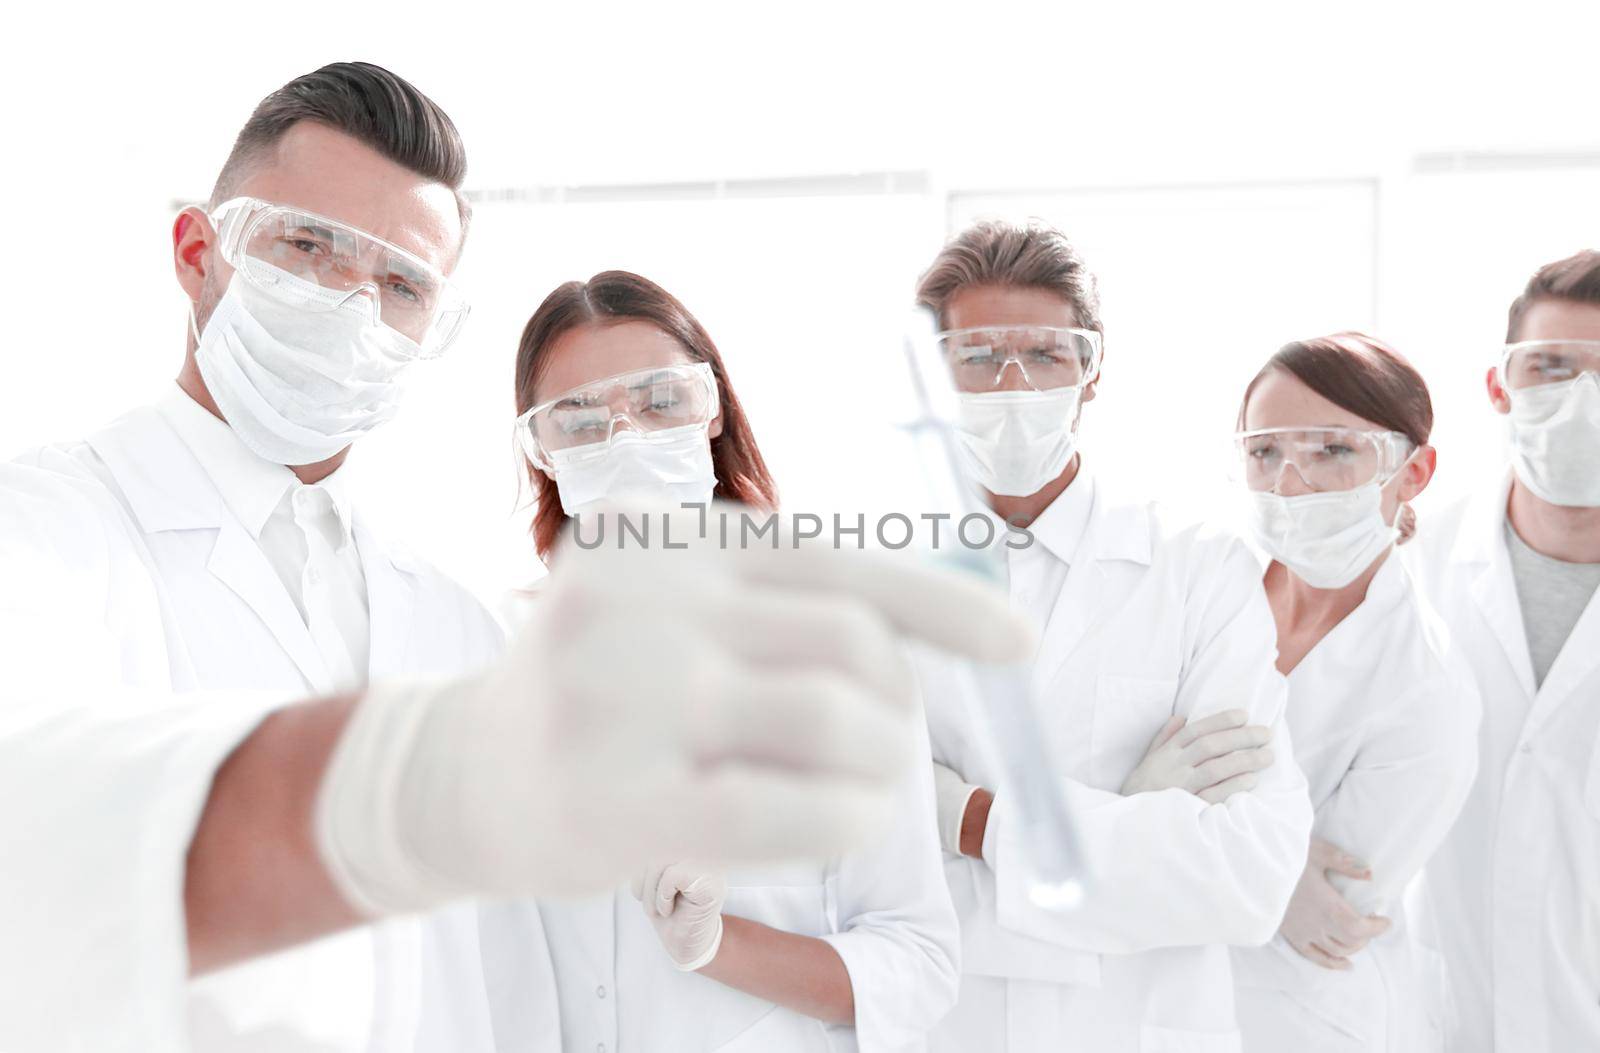 background image is a group of medical workers working with liquids in laboratory by asdf